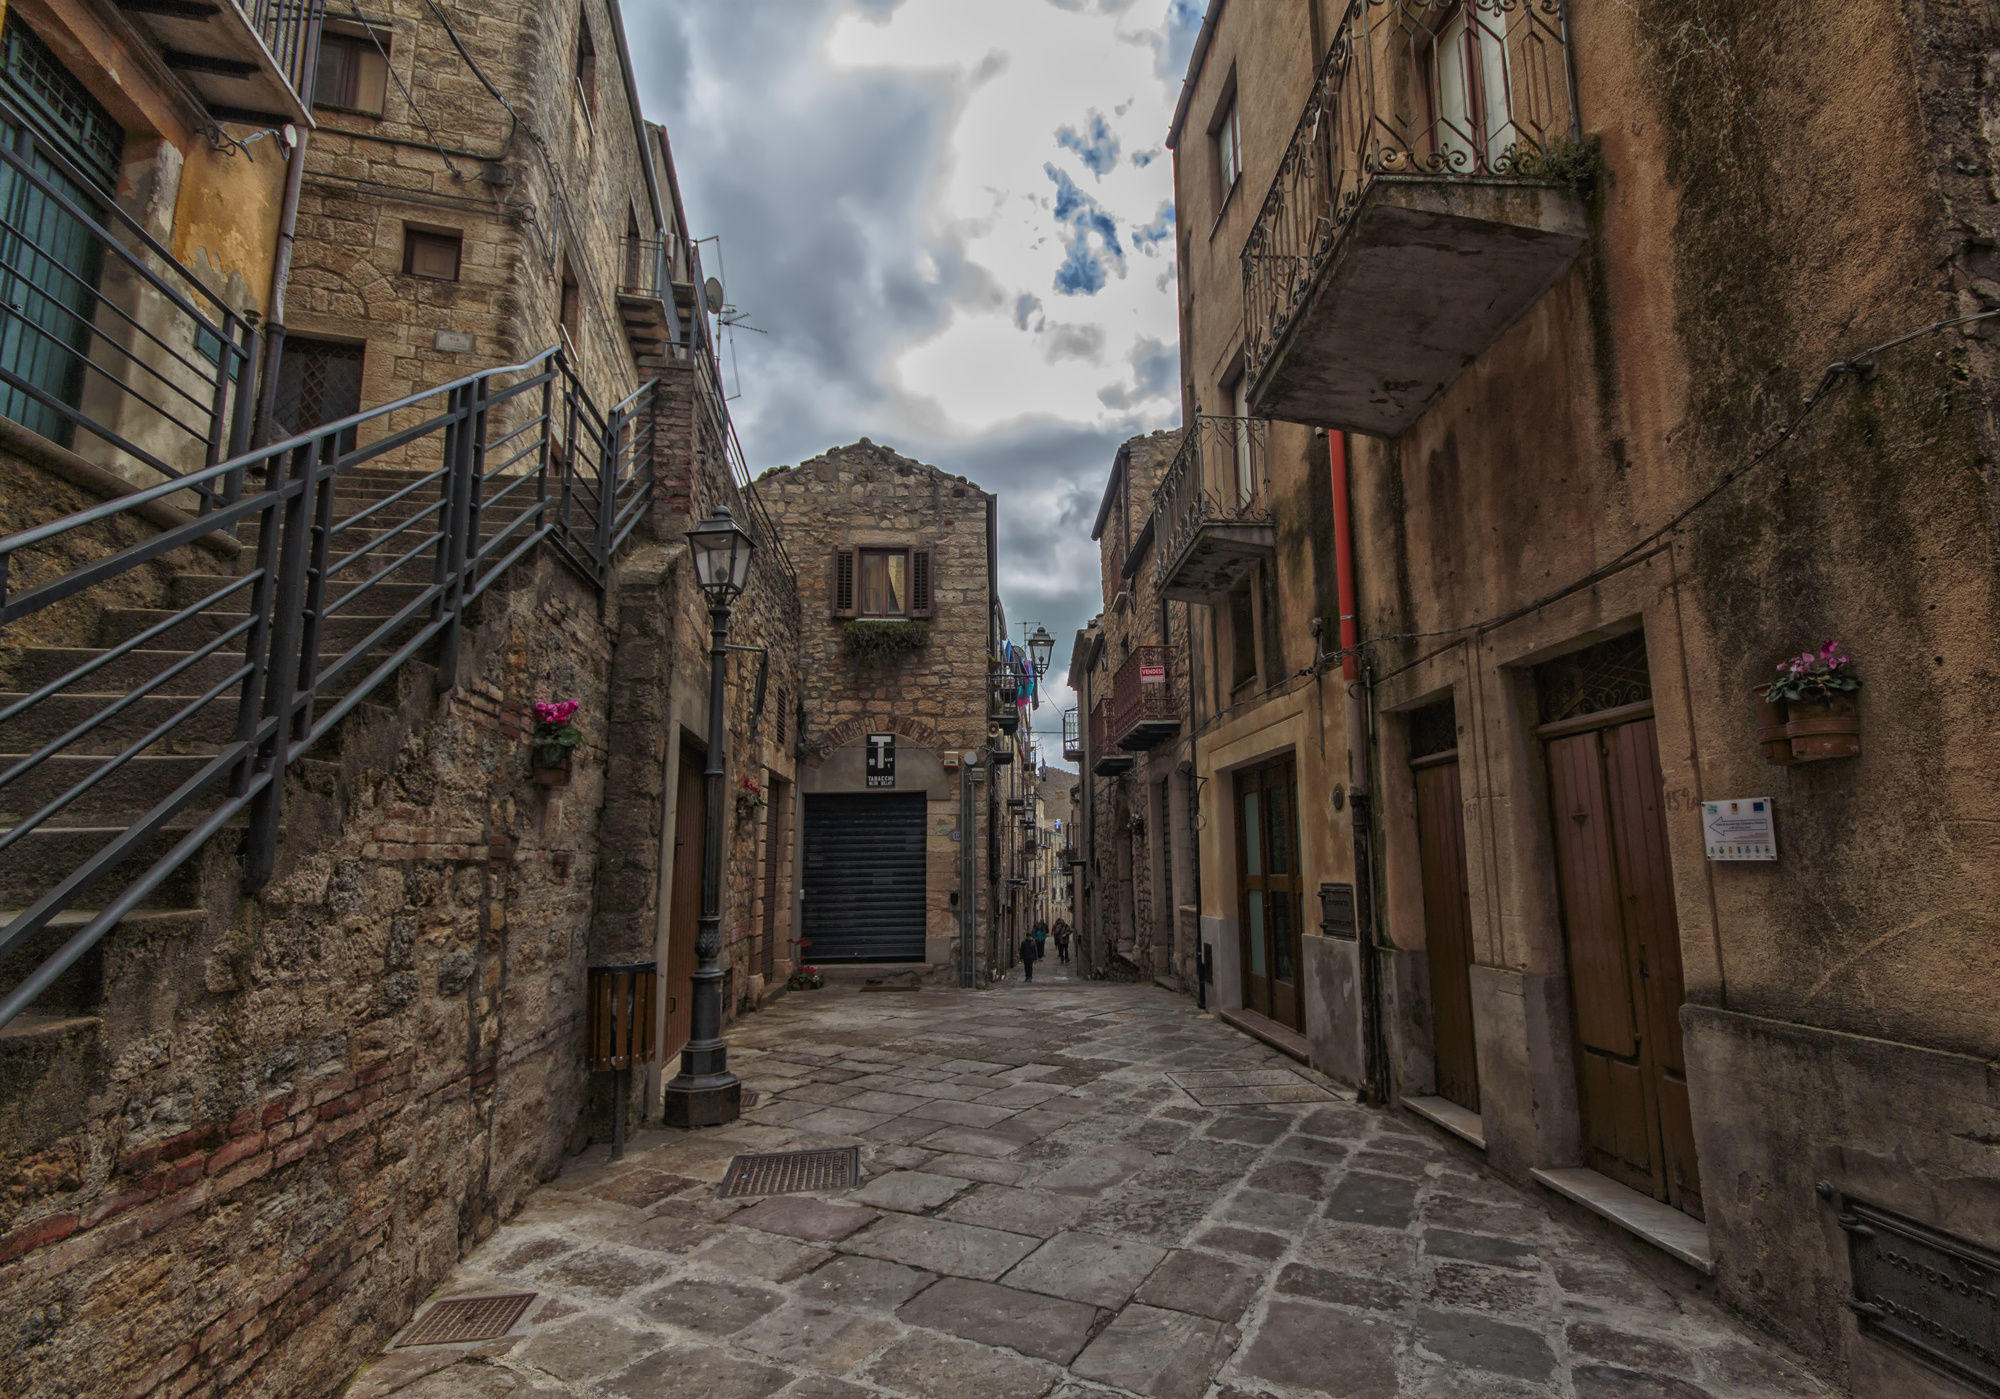 Through wide and narrow alleys